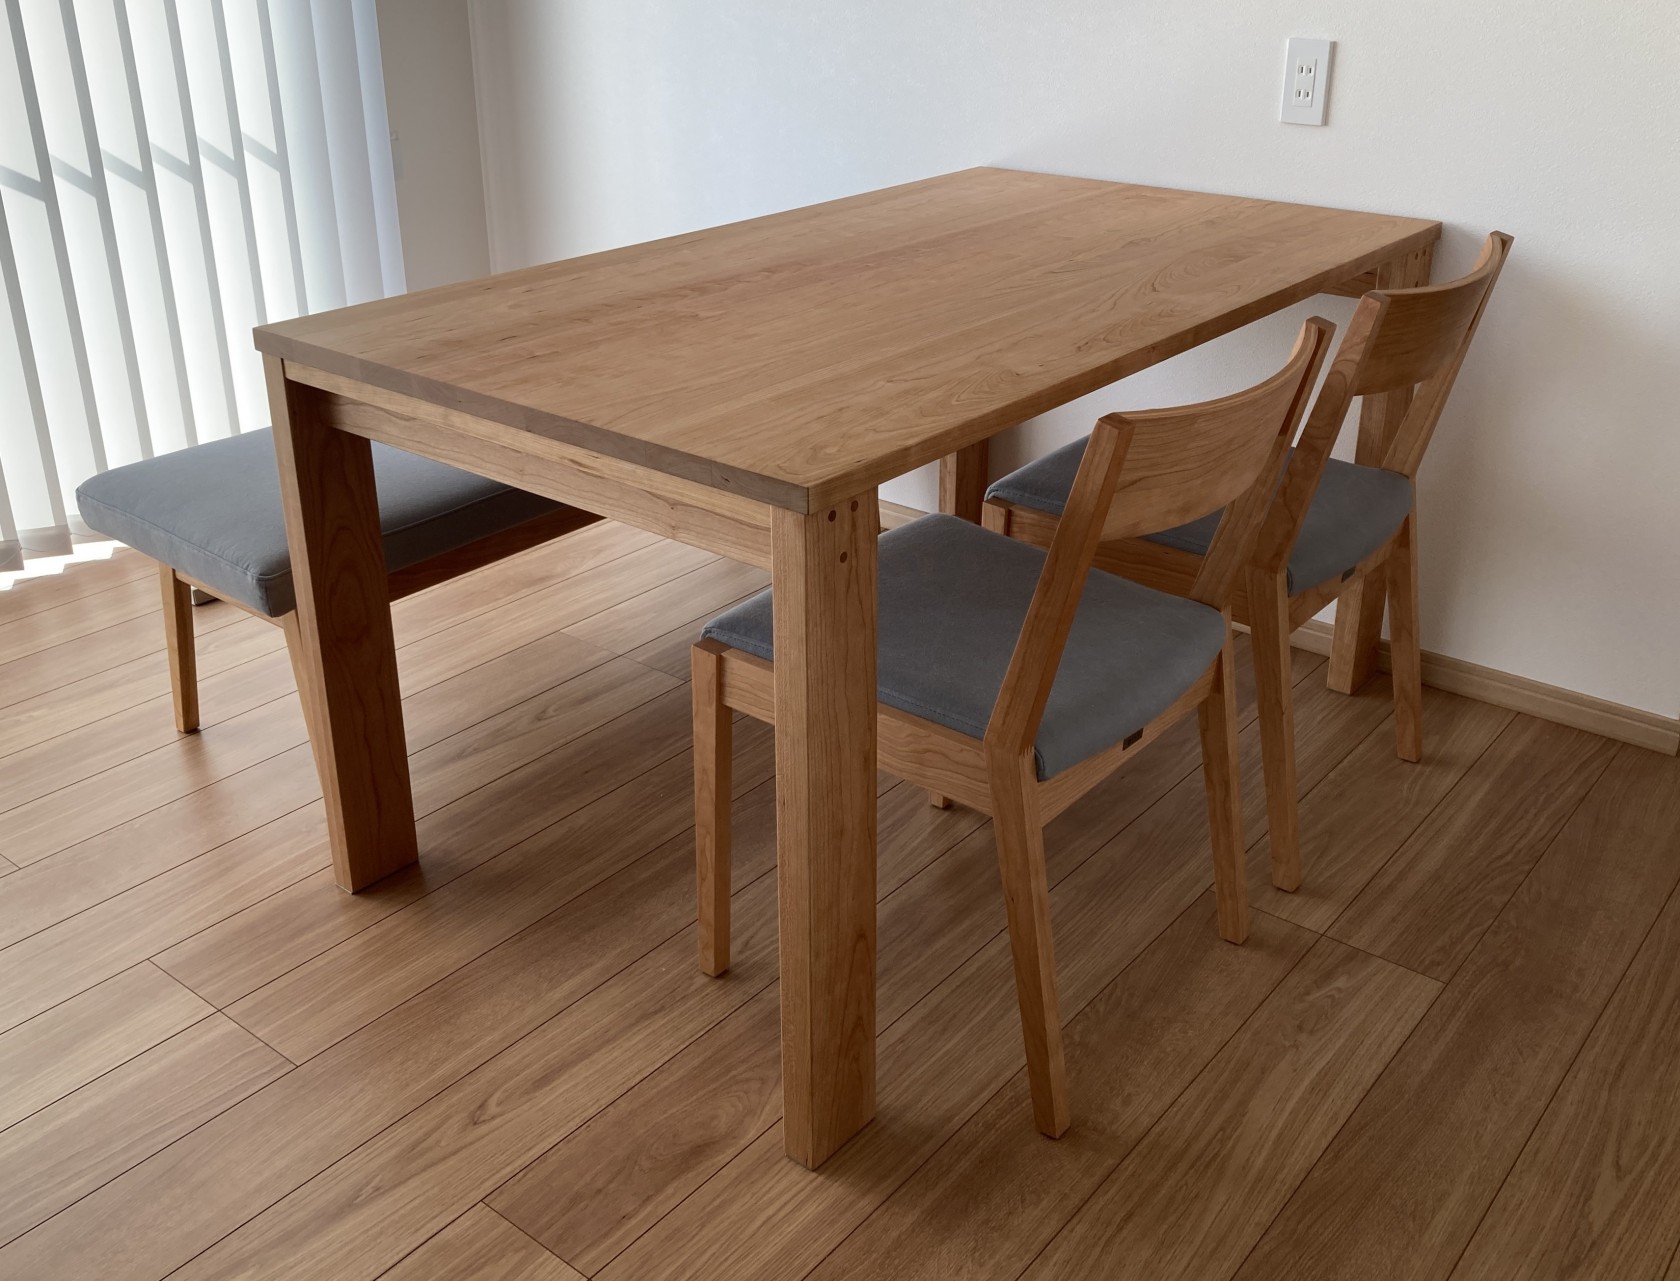 Cayman Dining table